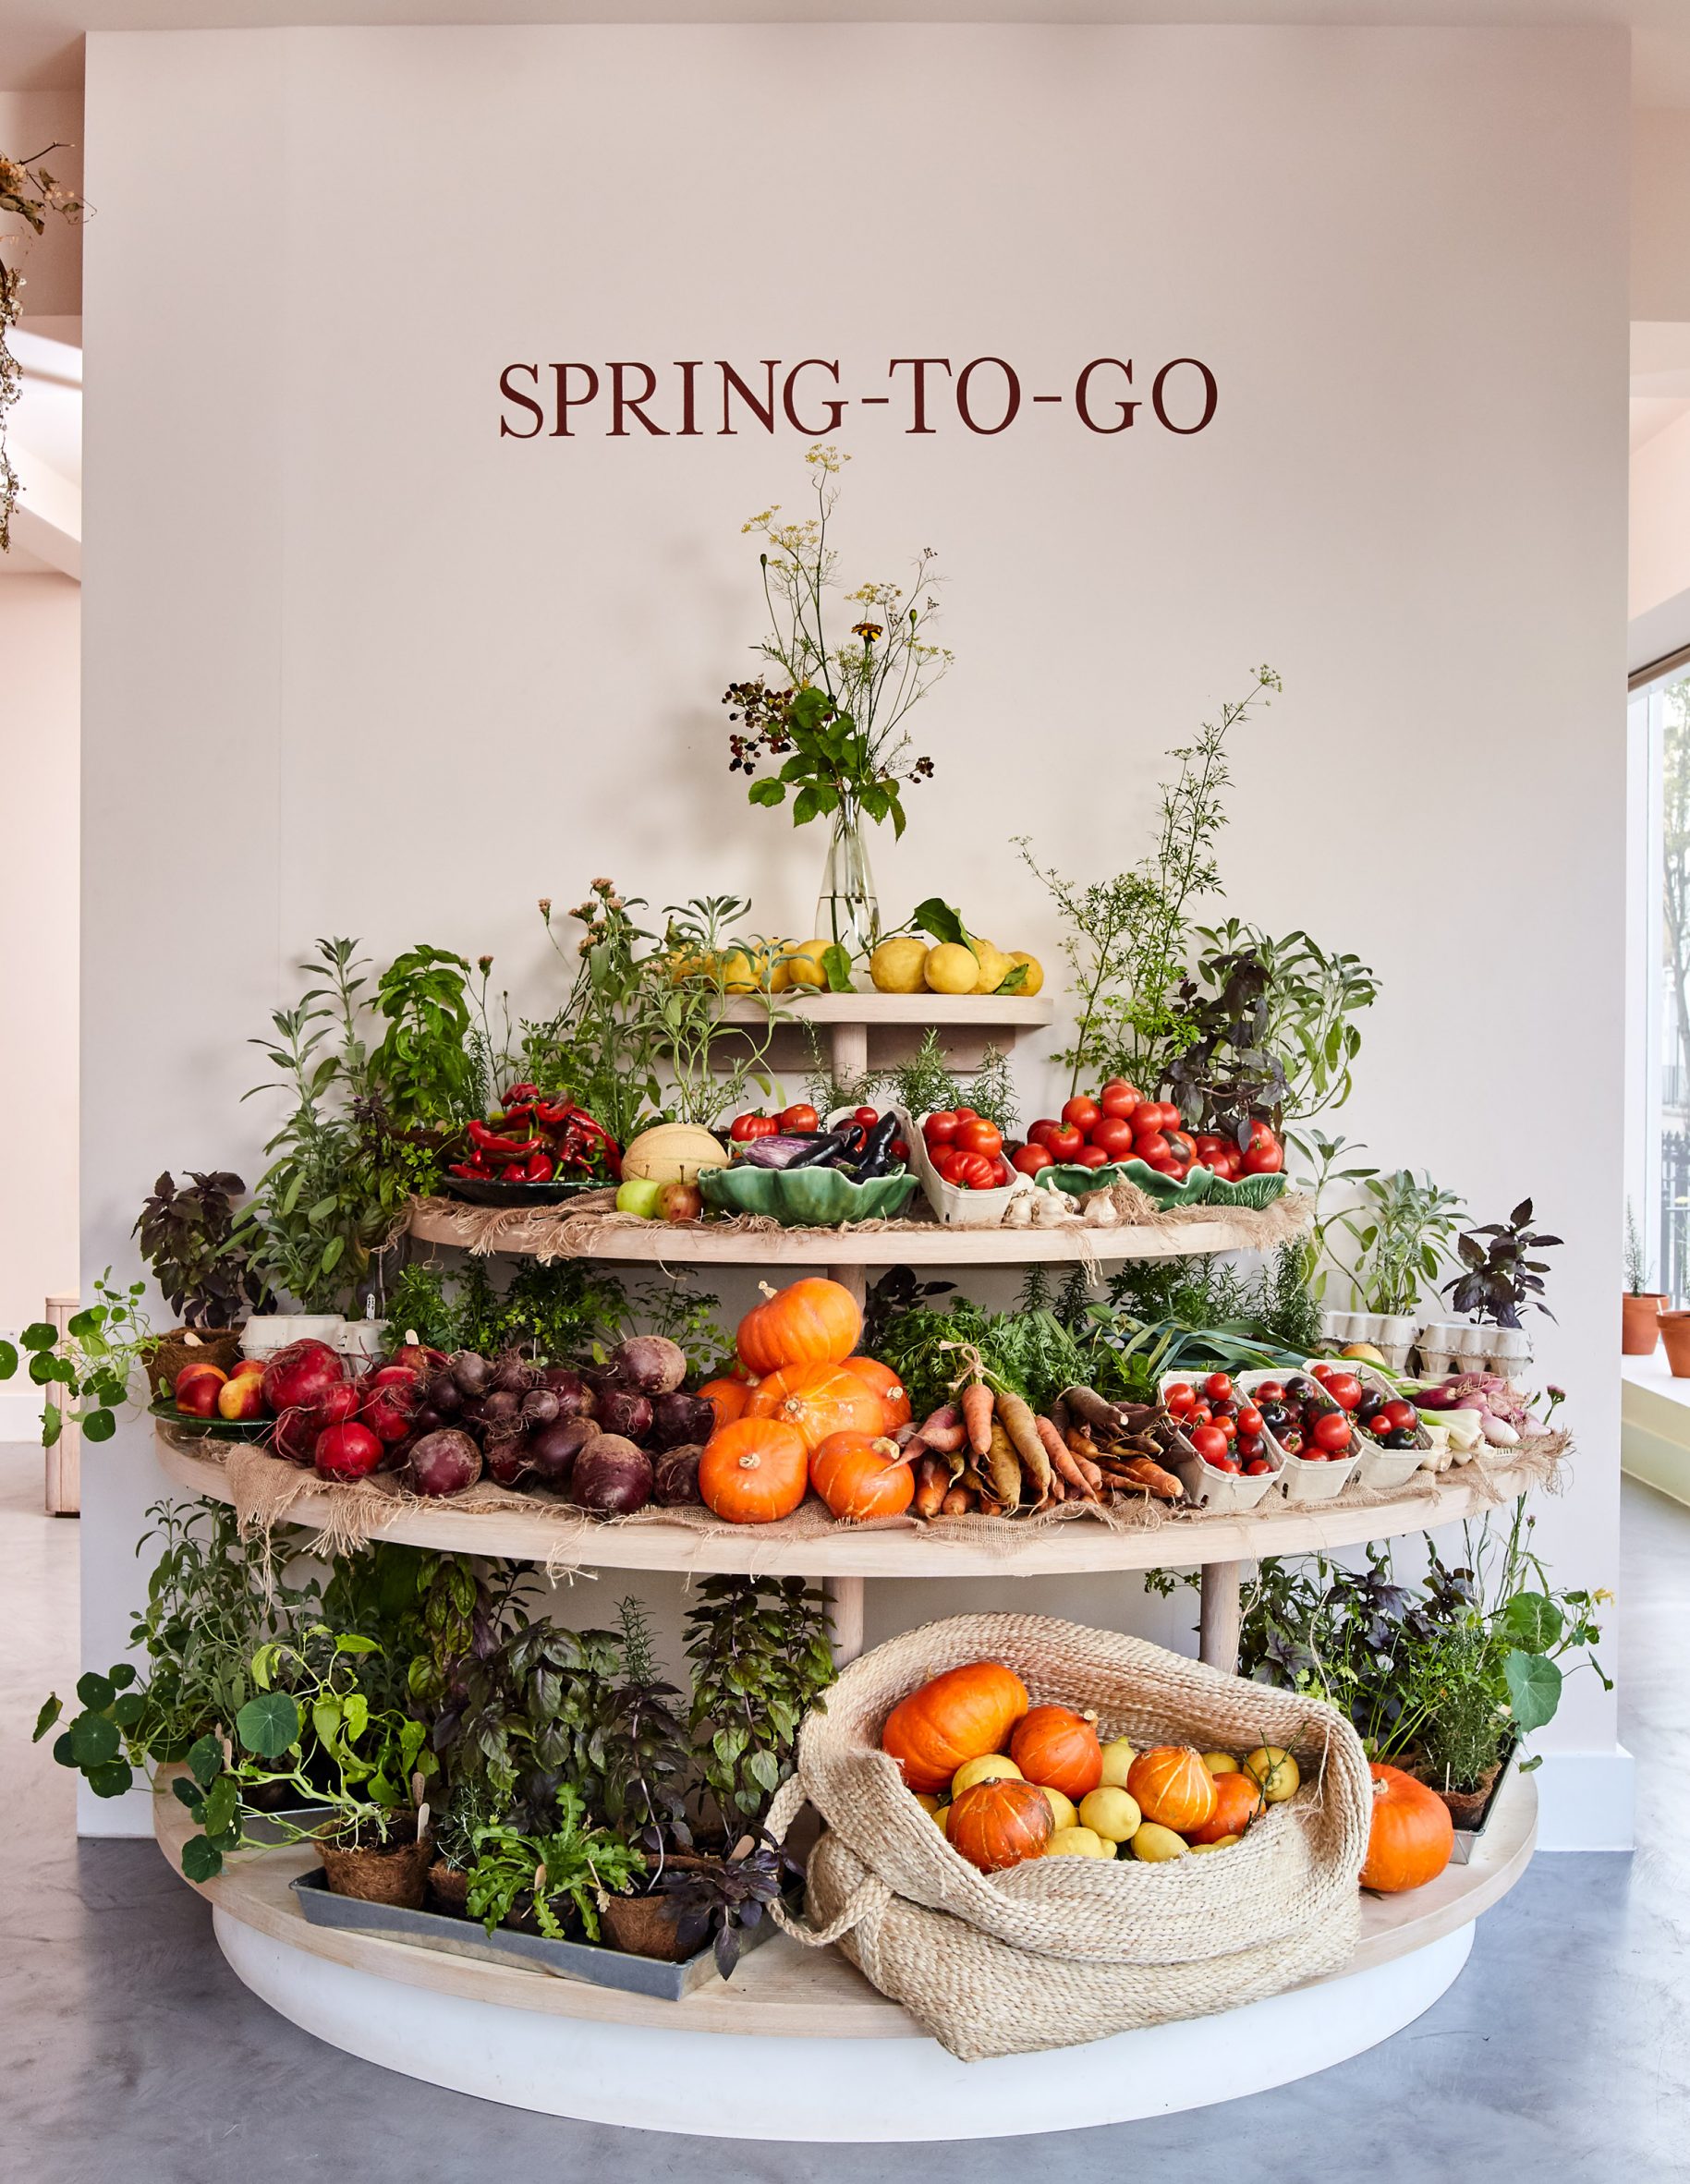 Spring-To-Go vegetable display